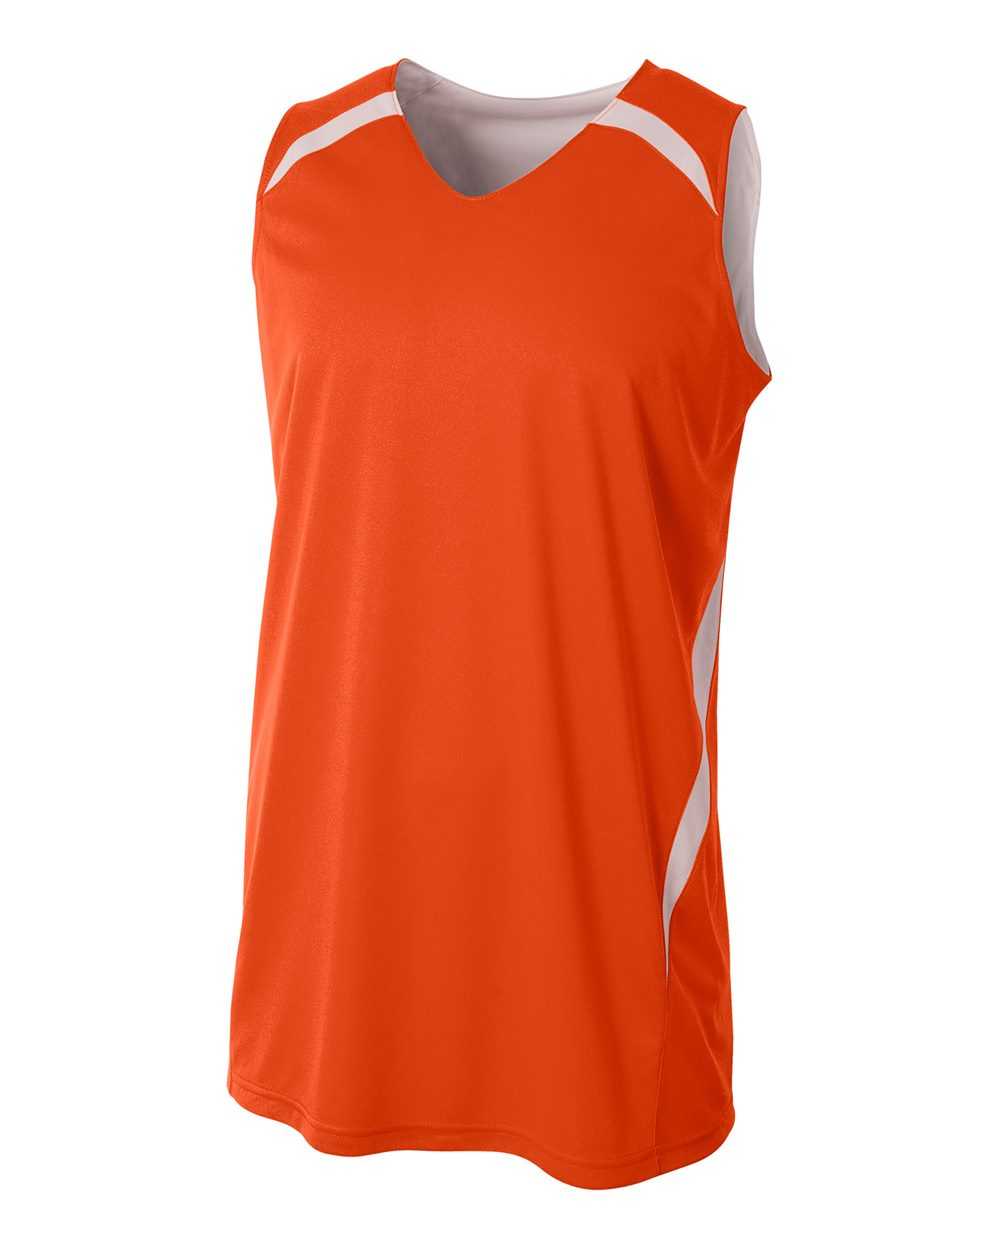 A4 N2372 Double Double Reversible Jersey - Orange White - HIT a Double